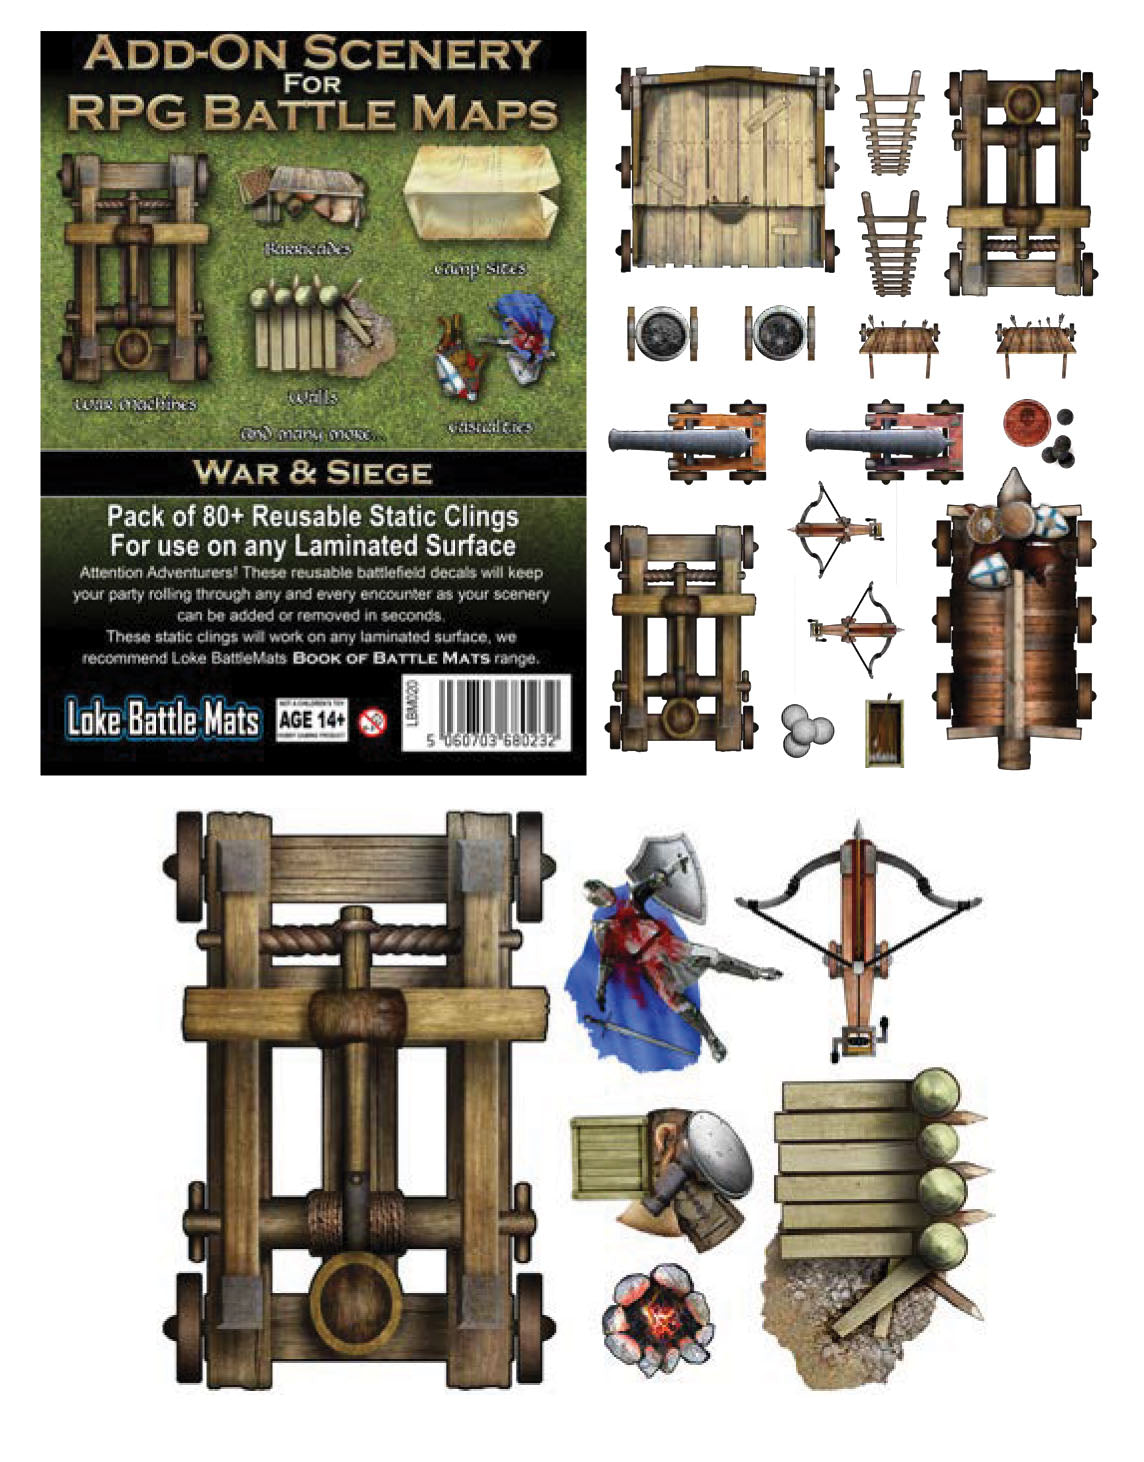 Battle Mats: Add-on Scenery for Battle Mats - War and Siege - Bards & Cards